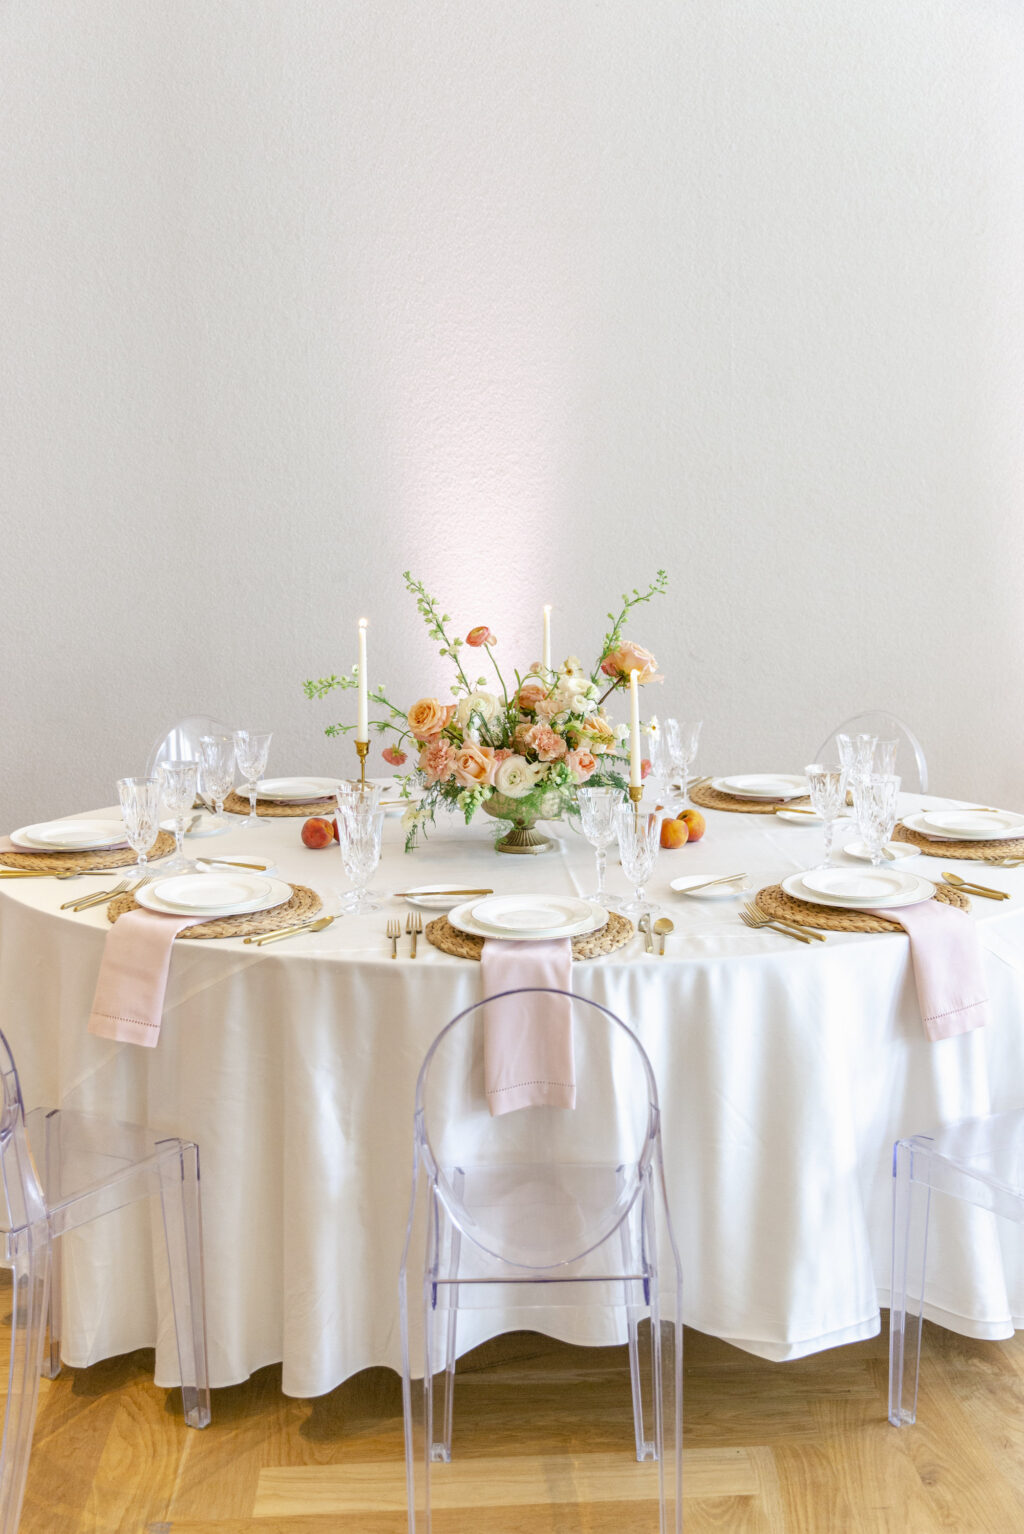 Roses and White Stock Flower Centerpieces | Peach and Blush Pink Boho Summer Wedding Reception Inspiration | Acrylic Ghost Chair Seating Ideas | Tampa Bay Kate Ryan Event Rentals